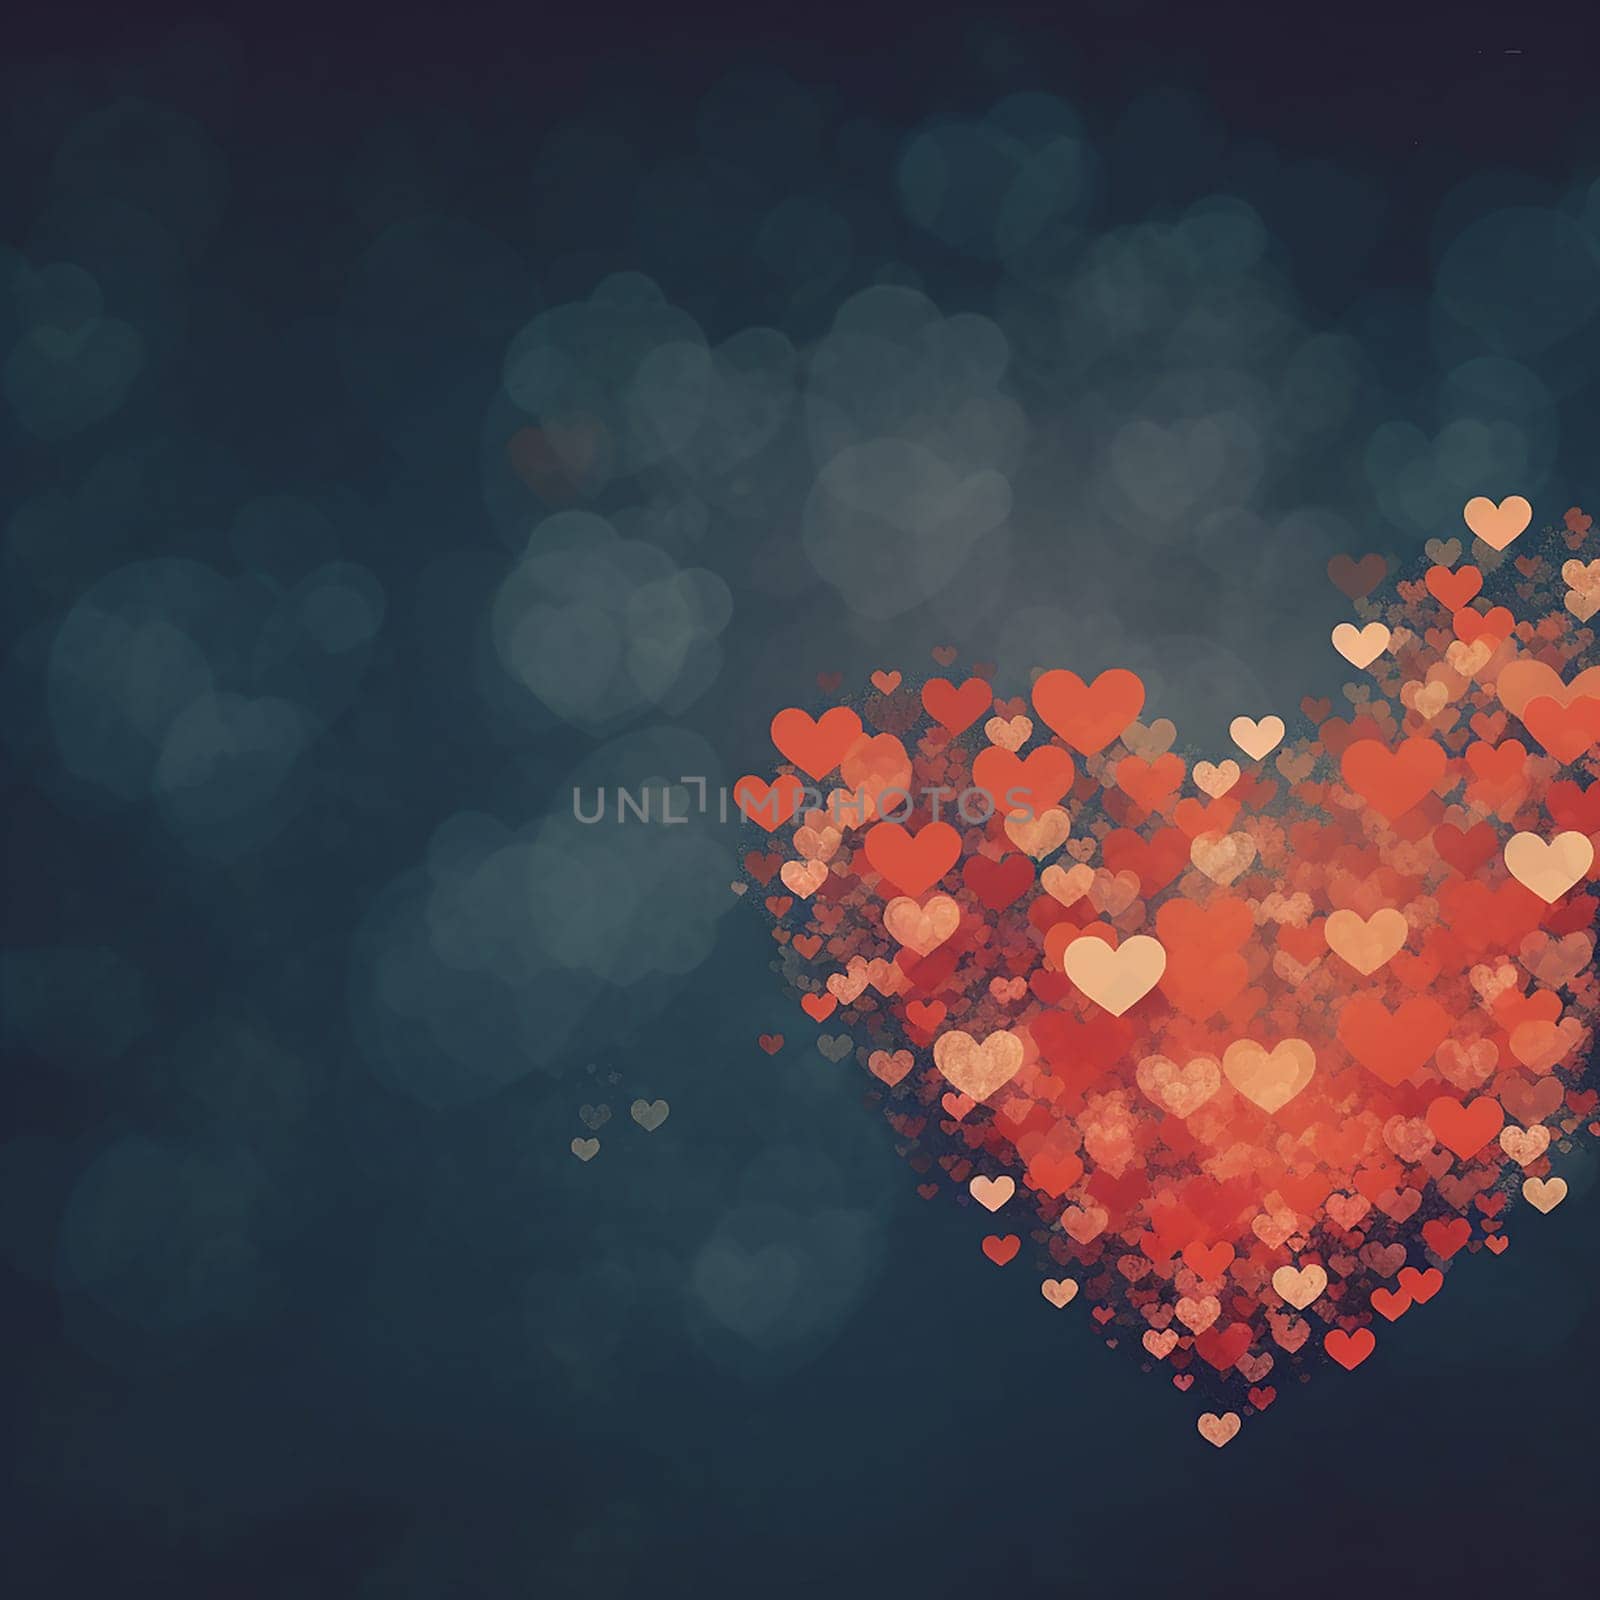 A cluster of red and orange hearts forming a larger heart shape. by Hype2art